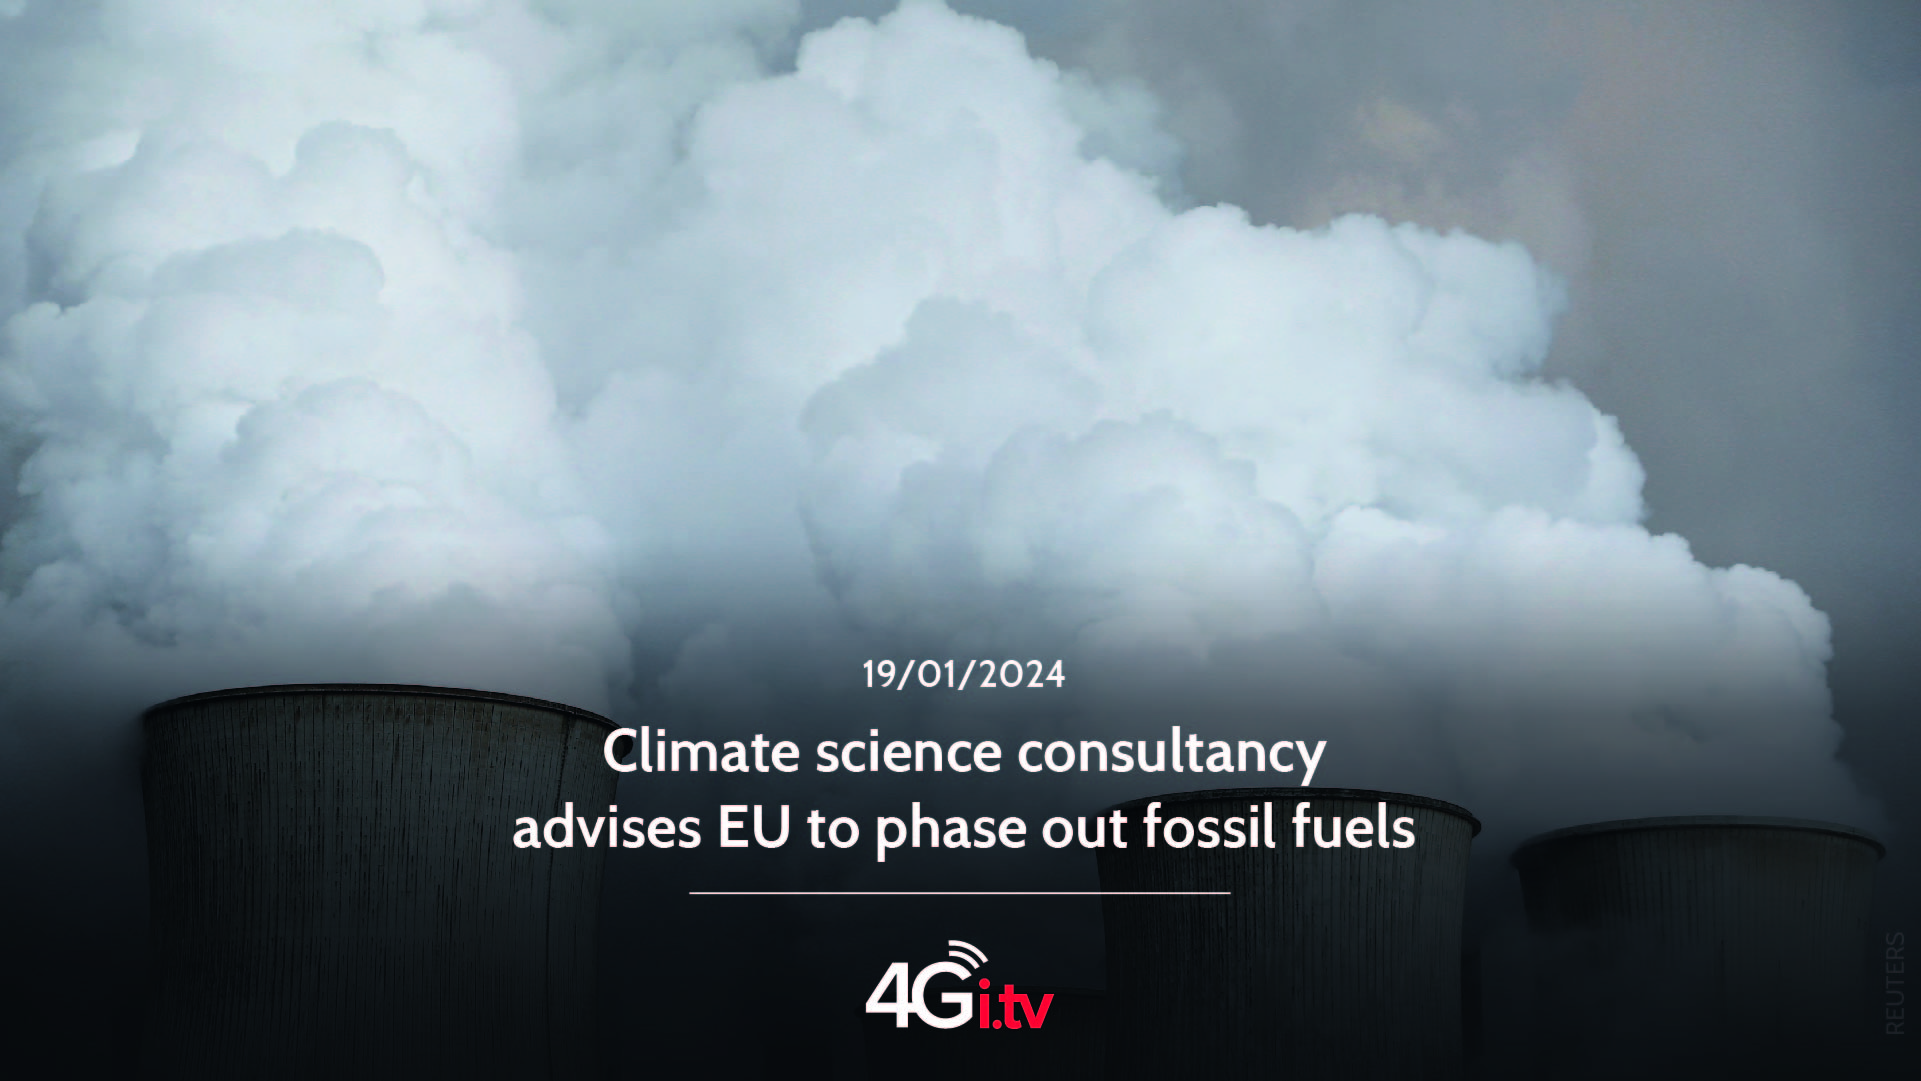 Подробнее о статье Climate science consultancy advises EU to phase out fossil fuels